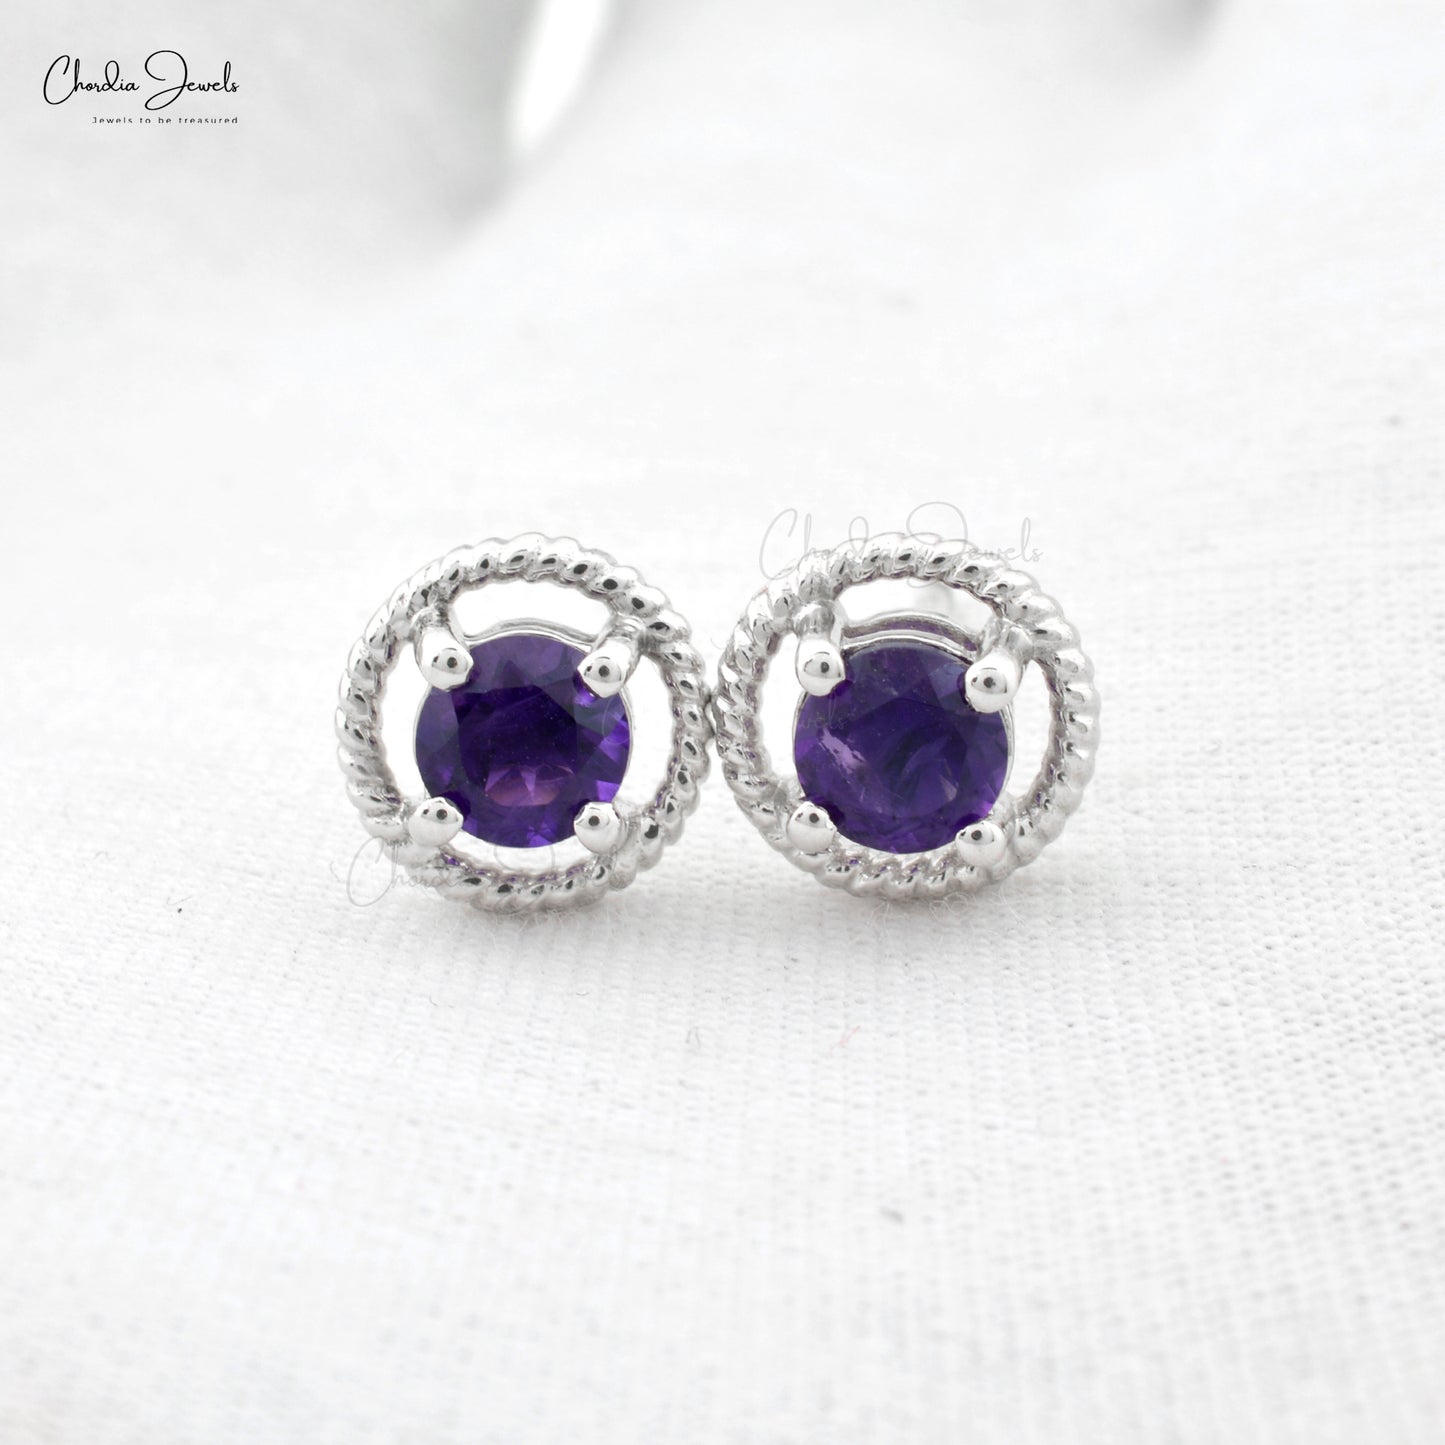 Natural Amethyst 5mm Round Brilliant Cut Spiral Studs, 0.84 Ct February Birthstone Gemstone Stud Earrings, 14k Solid White Gold 4-Prong Set Minimalist Jewelry For Birthday Gift